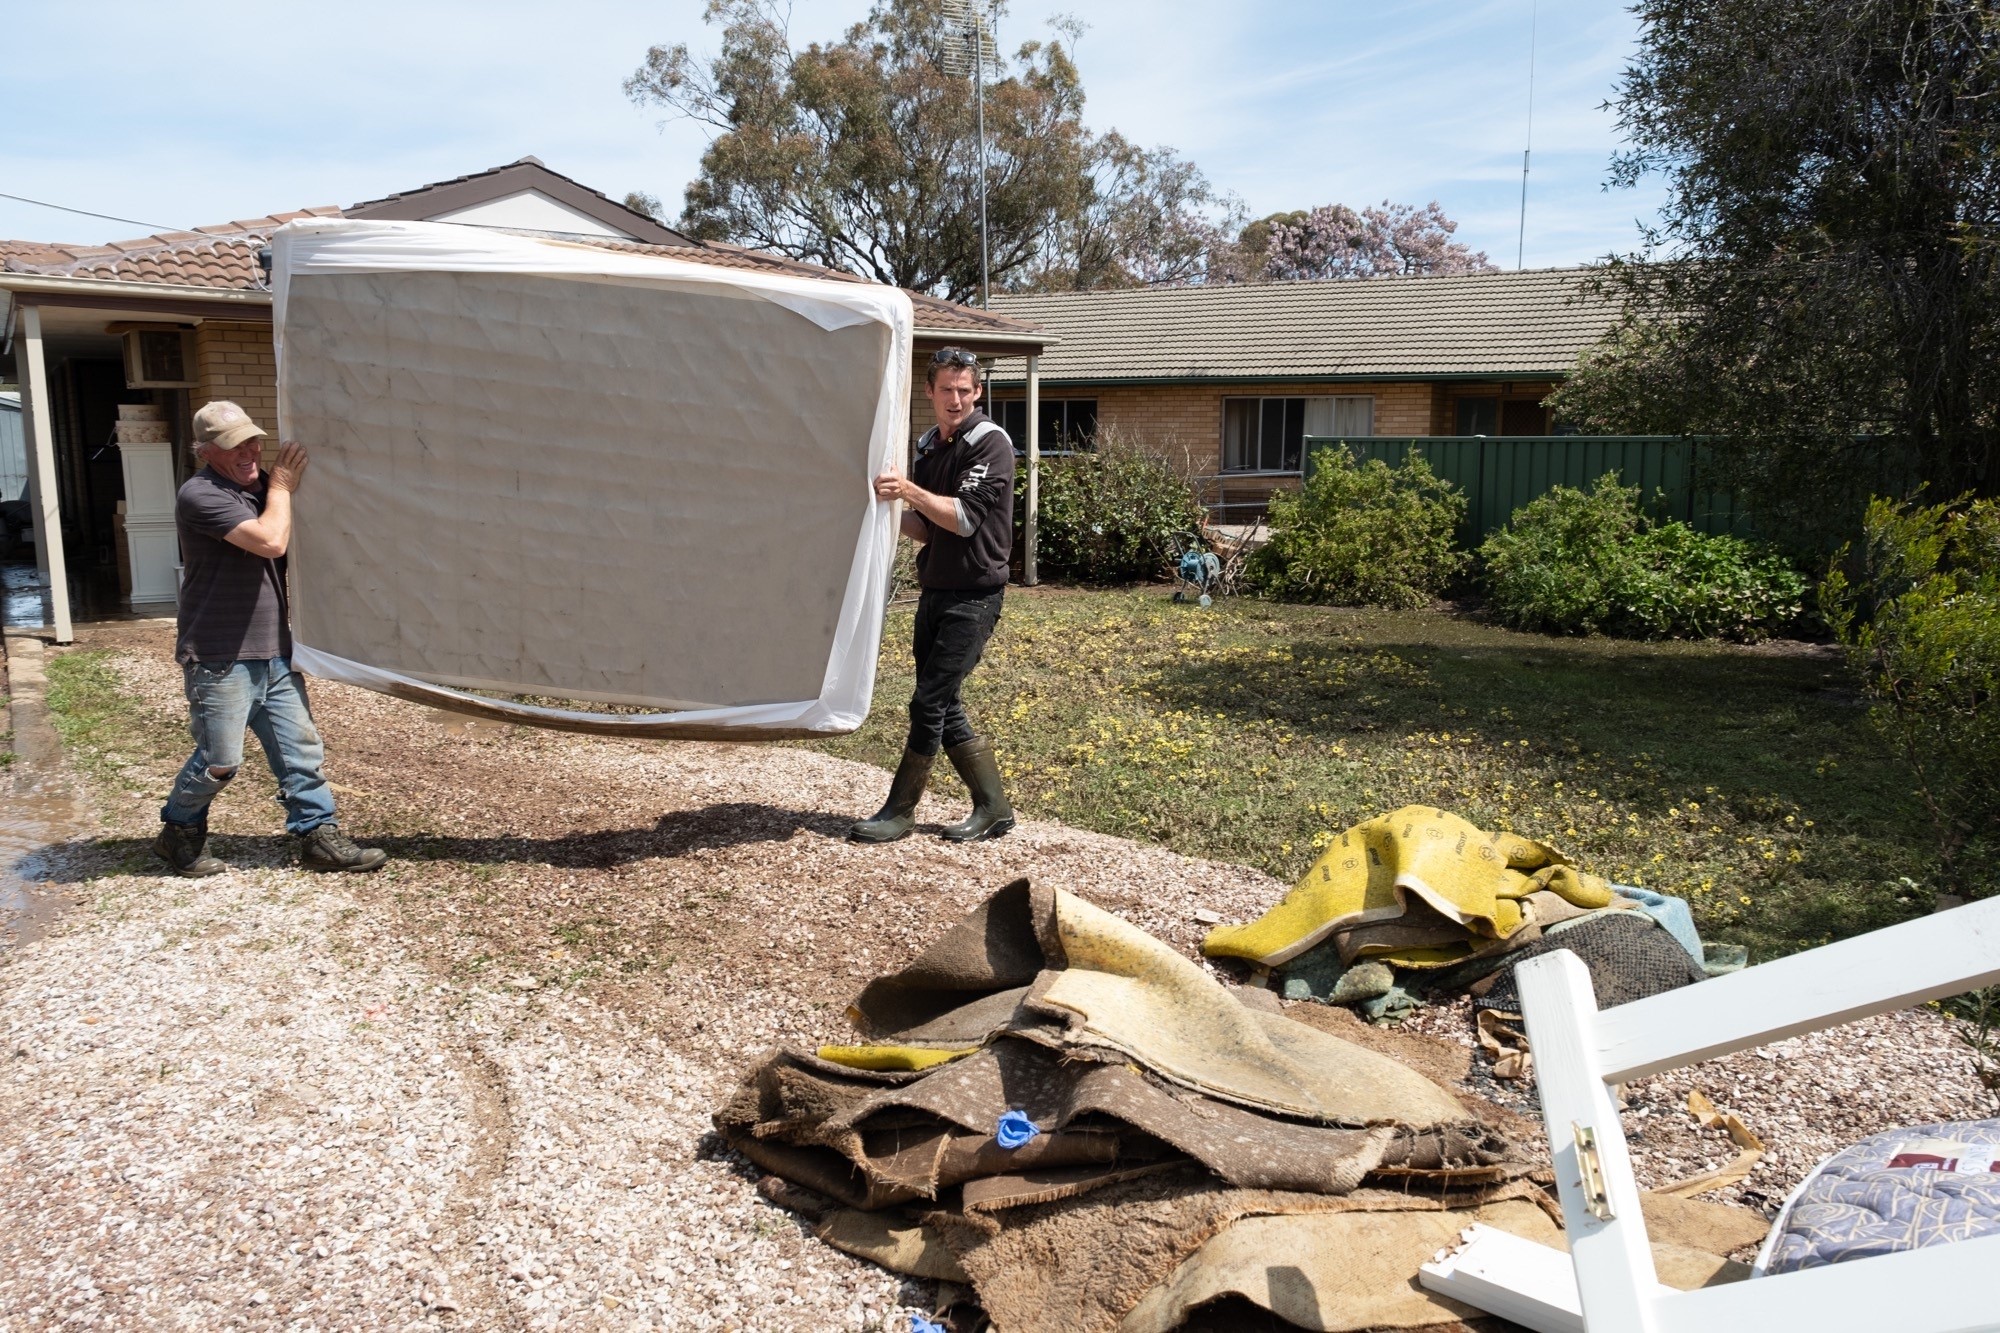 Men carry out a mattress from a flooded home.